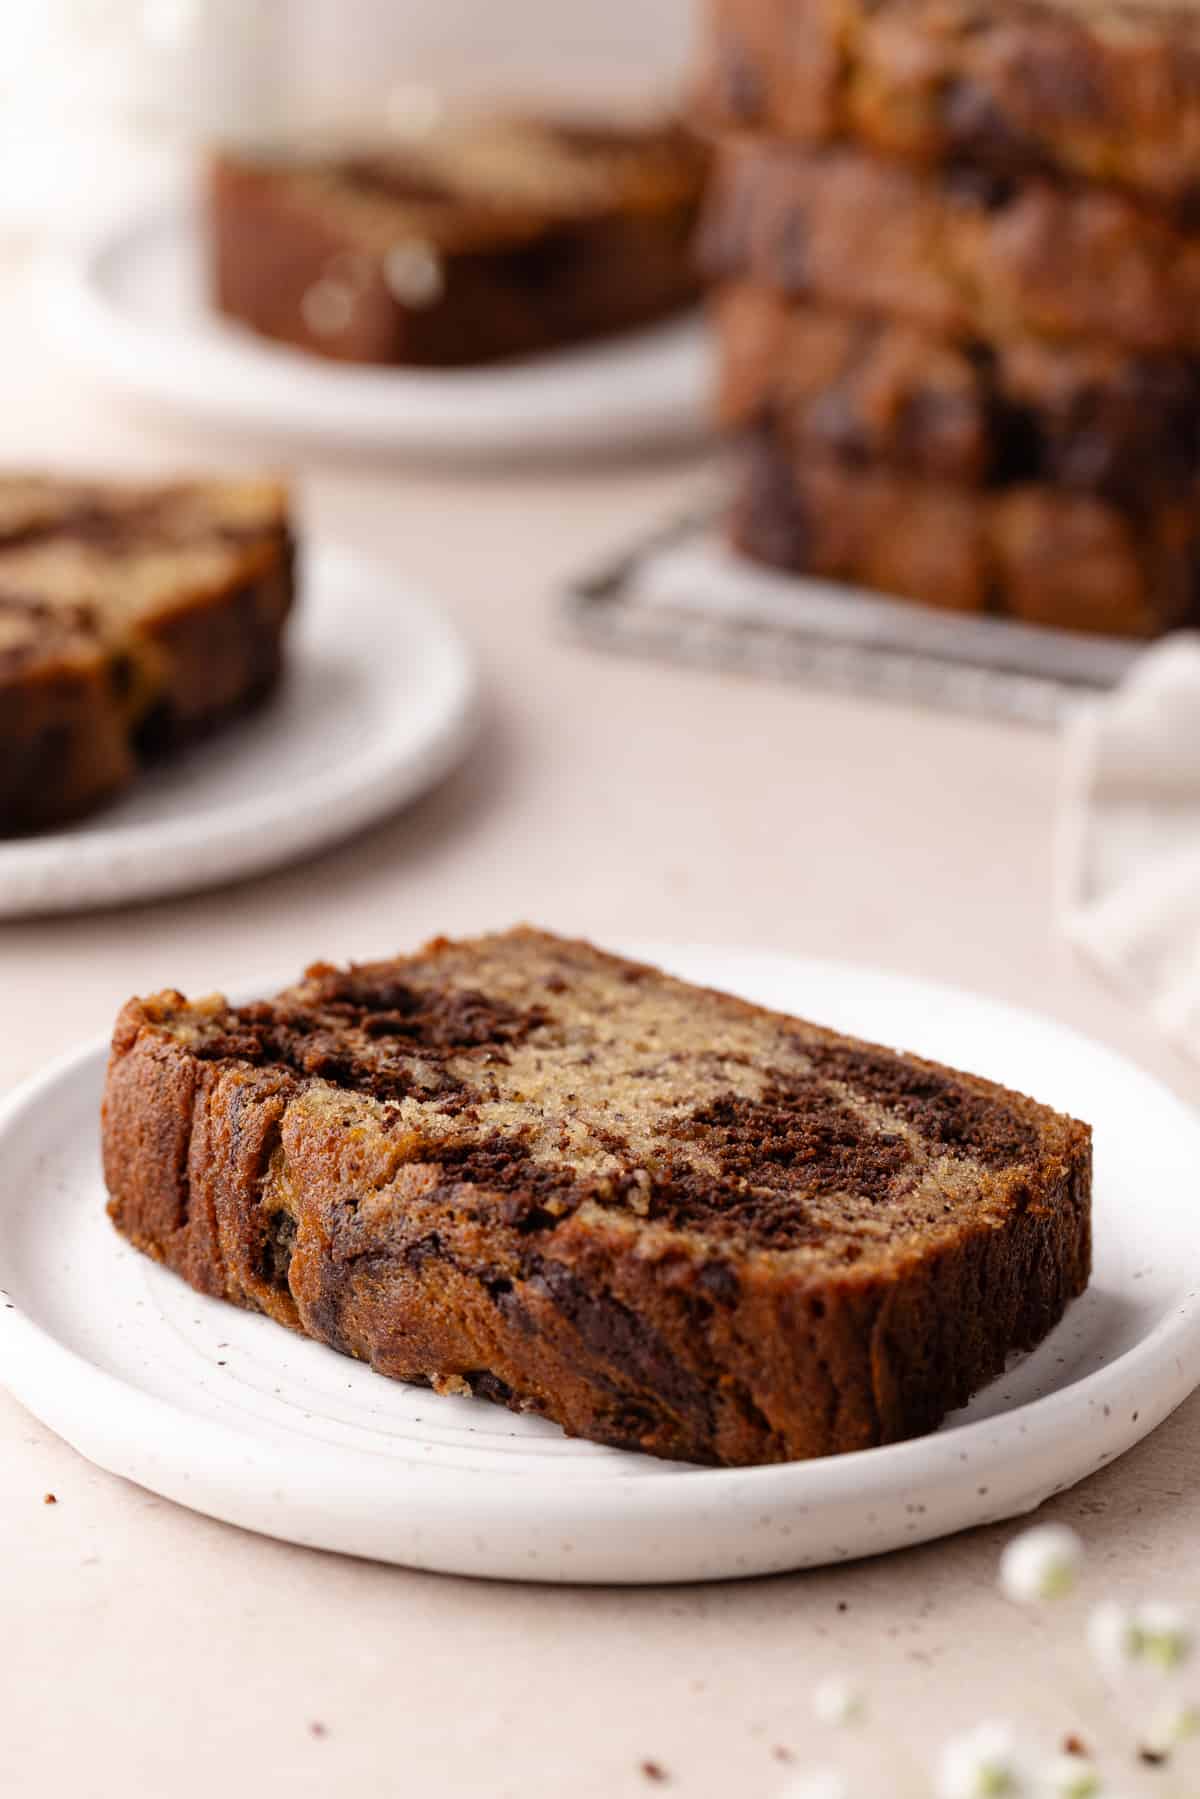 Chocolate marbled banana bread sliced on small plates.